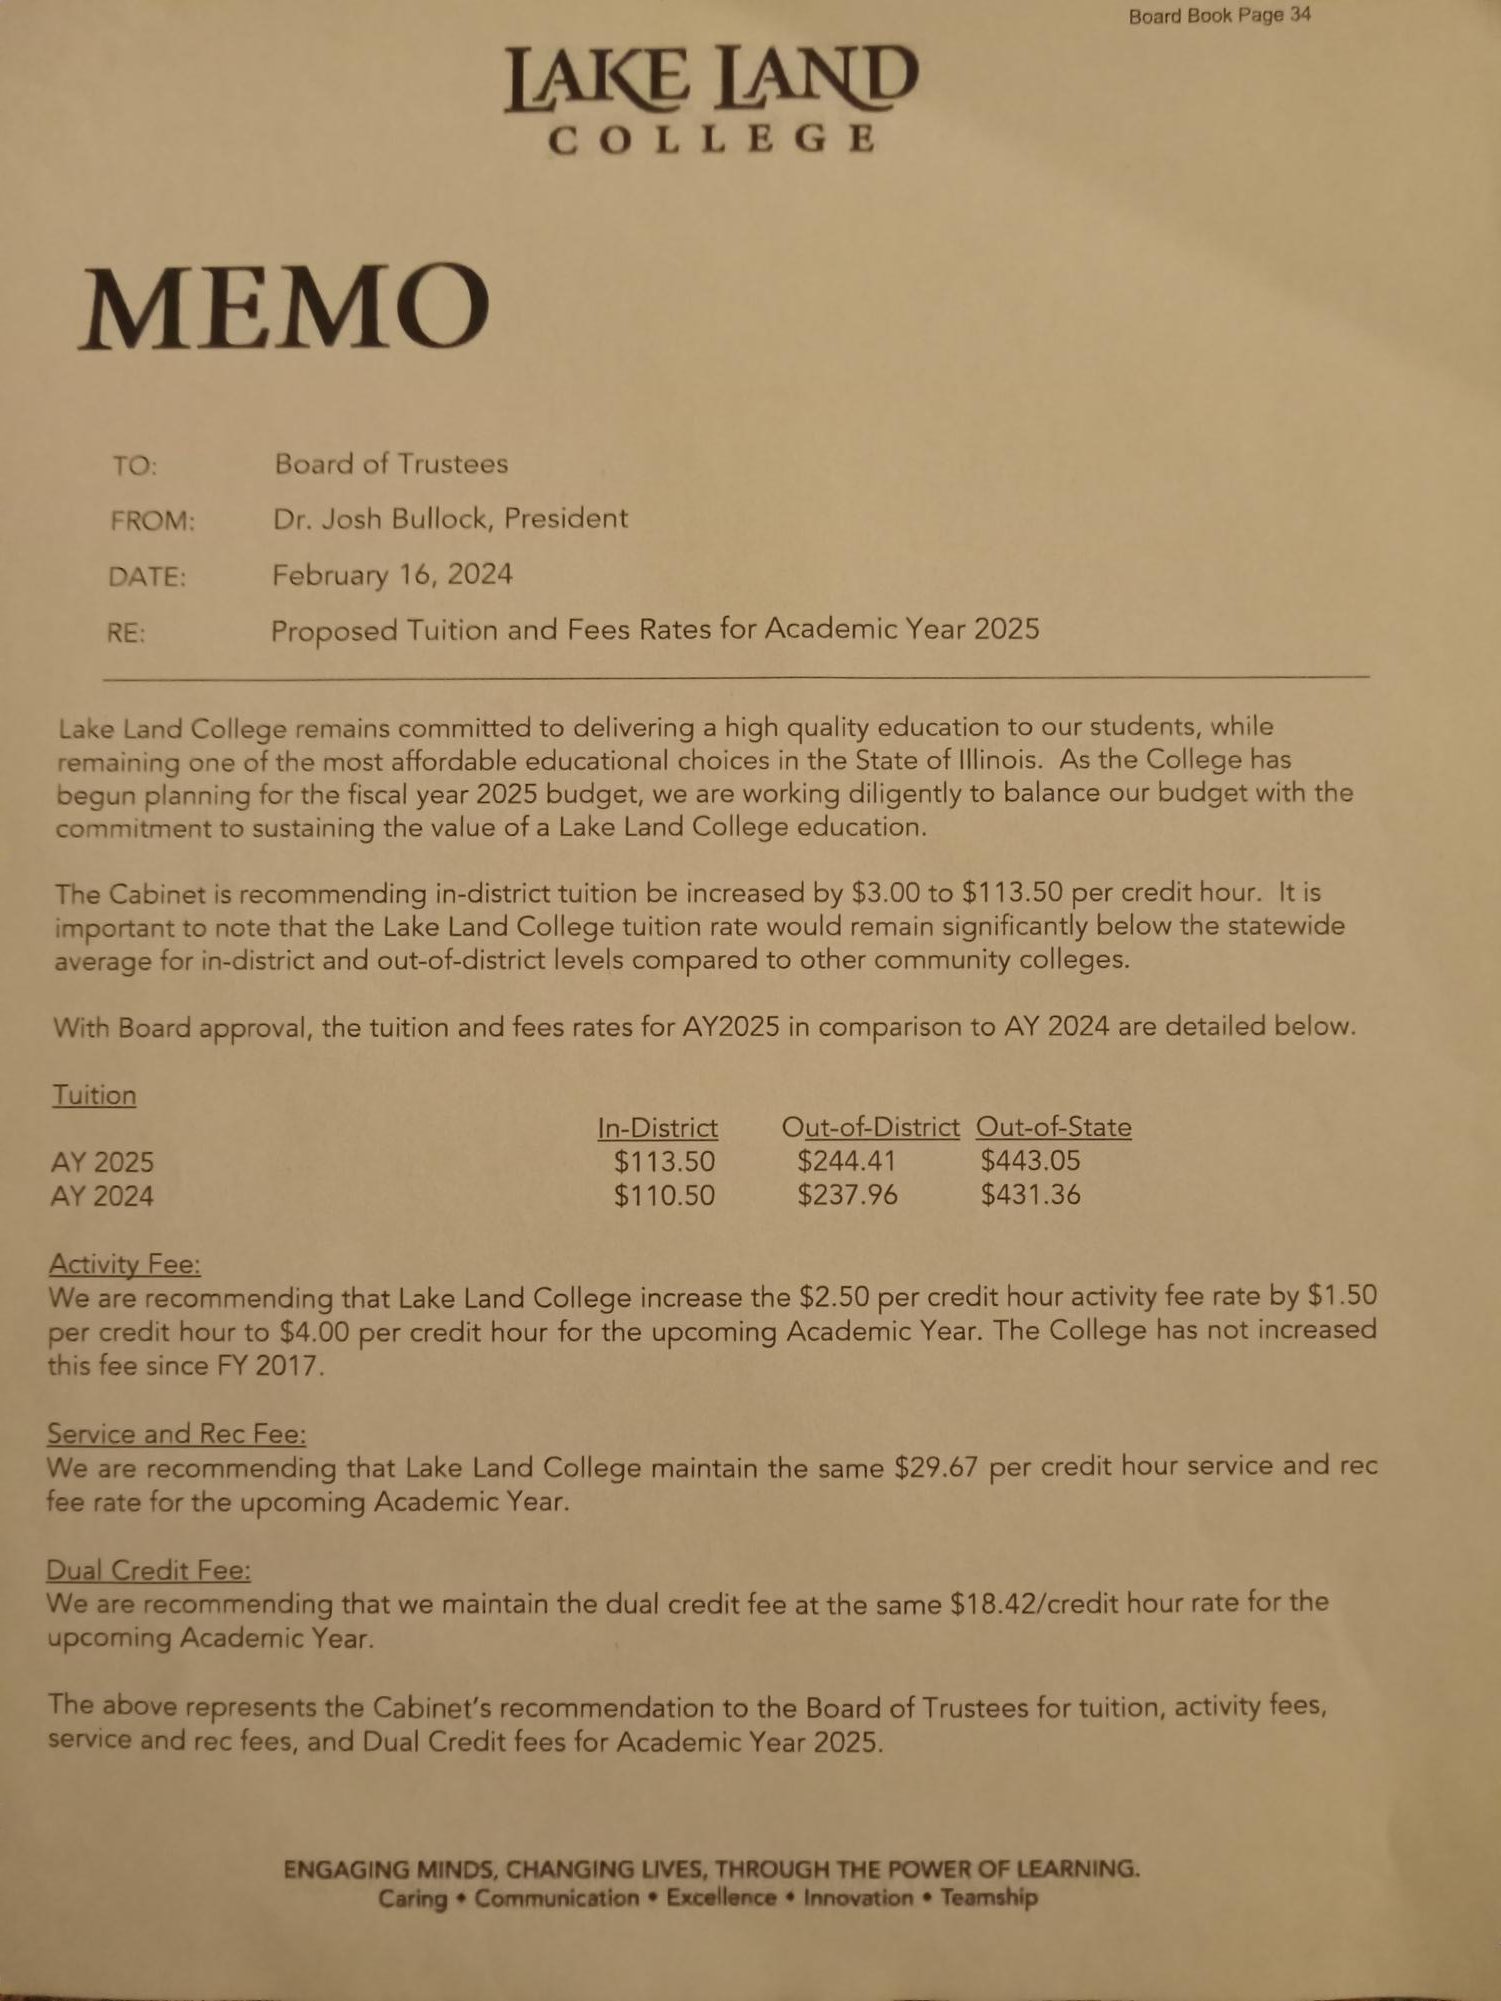 The official memo of the Tuition and Rates increase. Photo by the Lake Land College Board of Trustees.